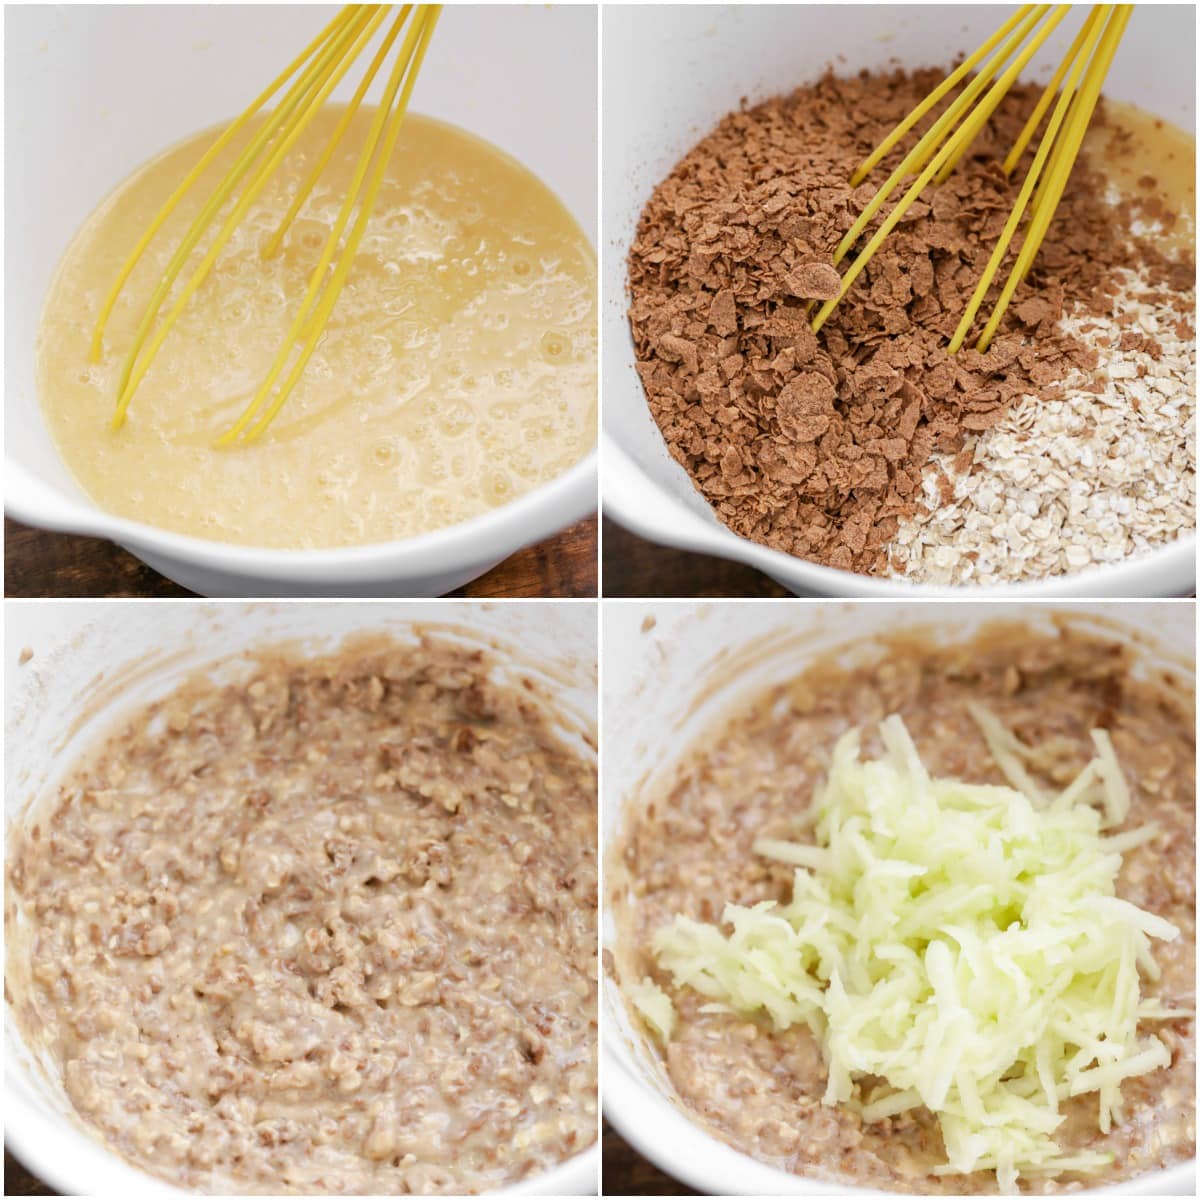 Oats, Bran, Cinnamon and Apples for Apple Bran Muffins